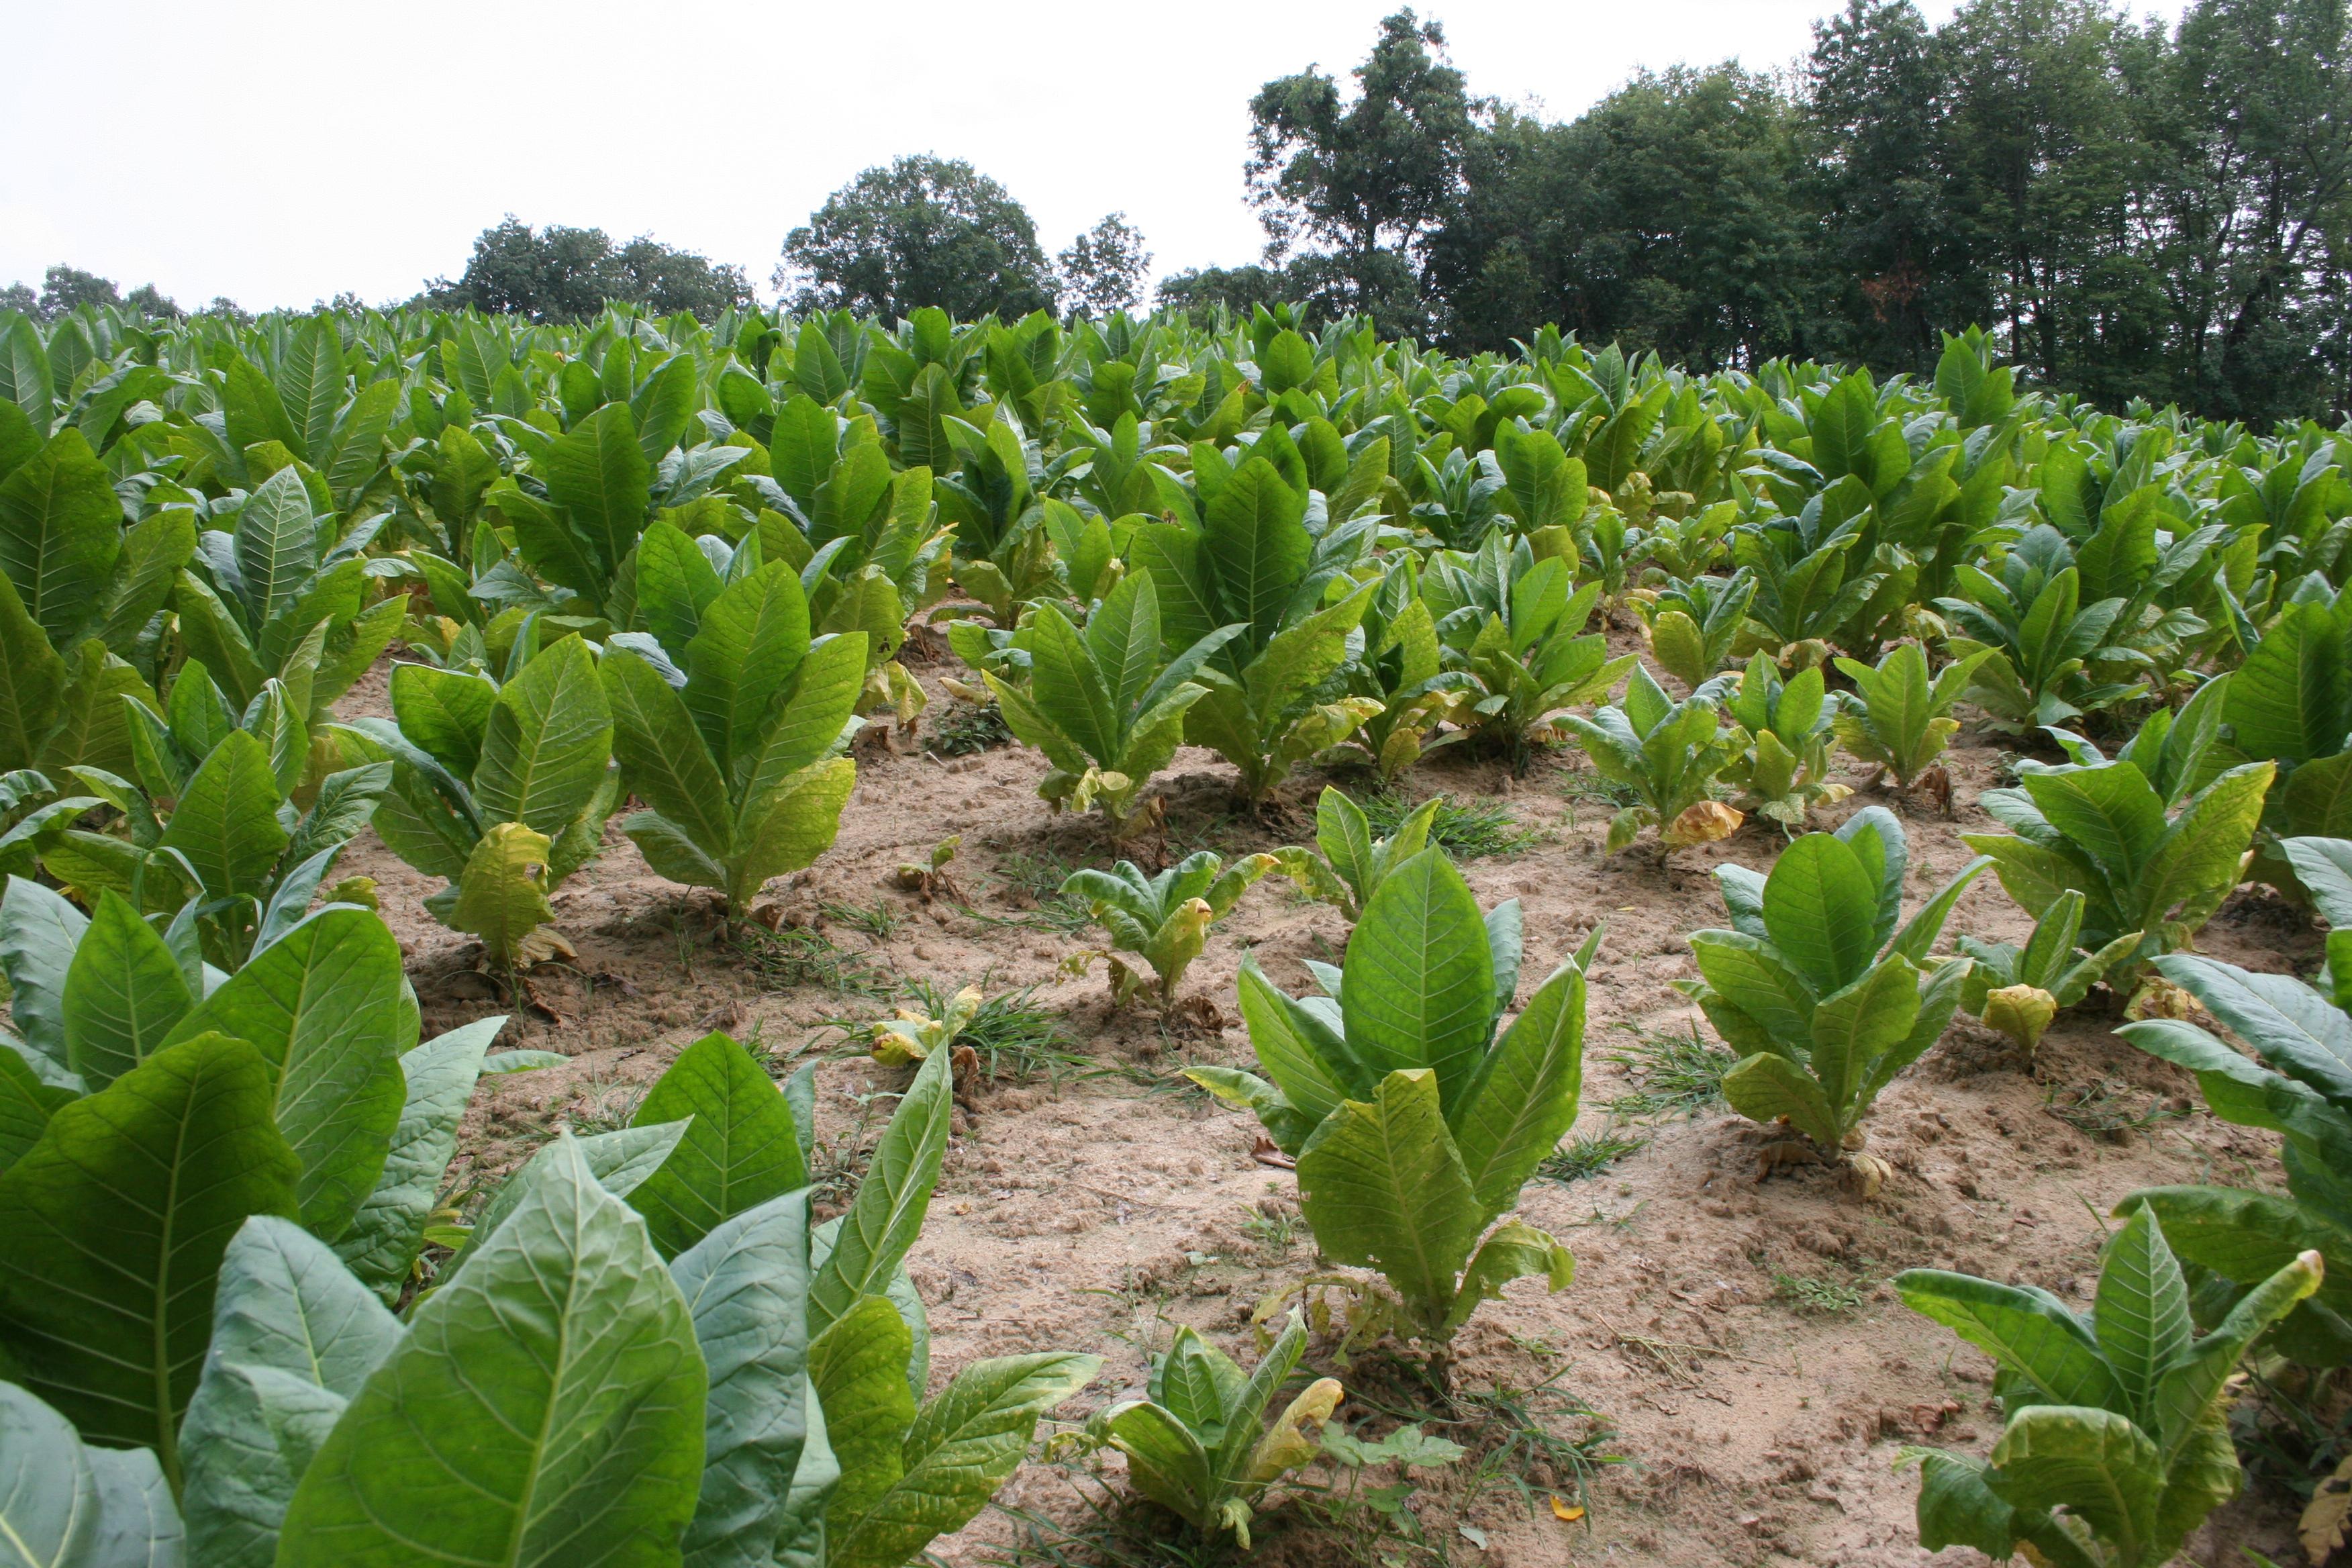 The root knot nematode pathogen is a tiny, microscopic round worm that can infect a wide range of host plants, including tobacco.  Infested fields typically have irregular patches of stunted, yellowed plants. Notice the various growth sizes of plants in this image. (Photo: Kenneth Seebold, UK)